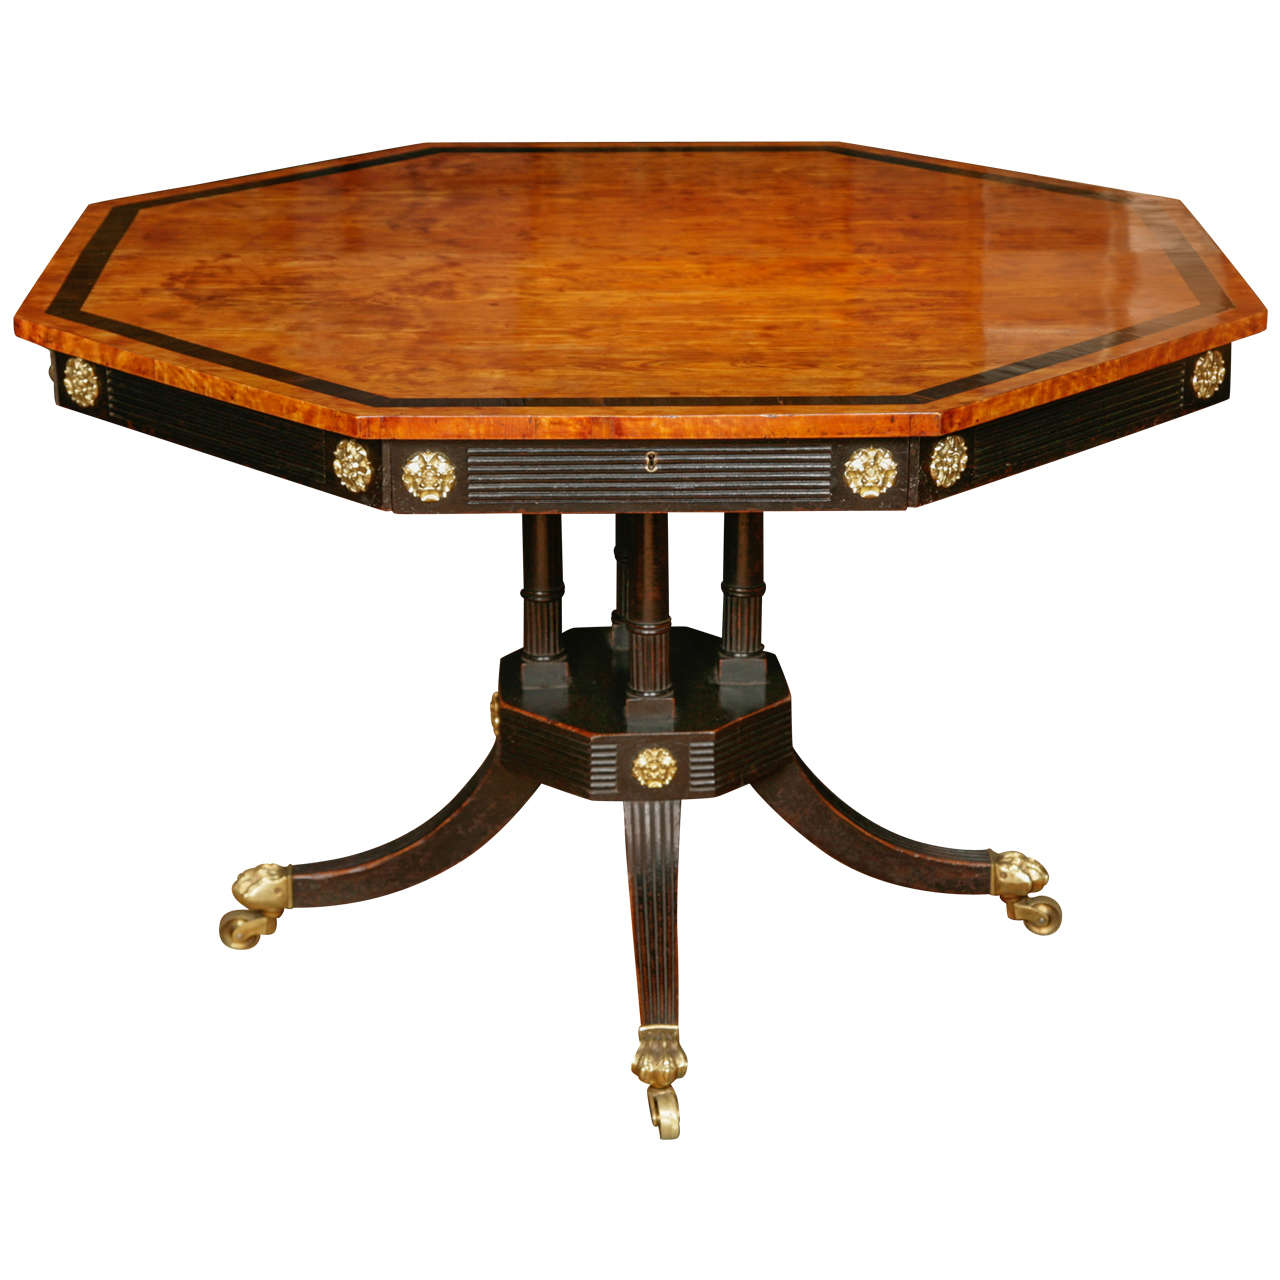 Early 19th Century Drum Table by Gillows